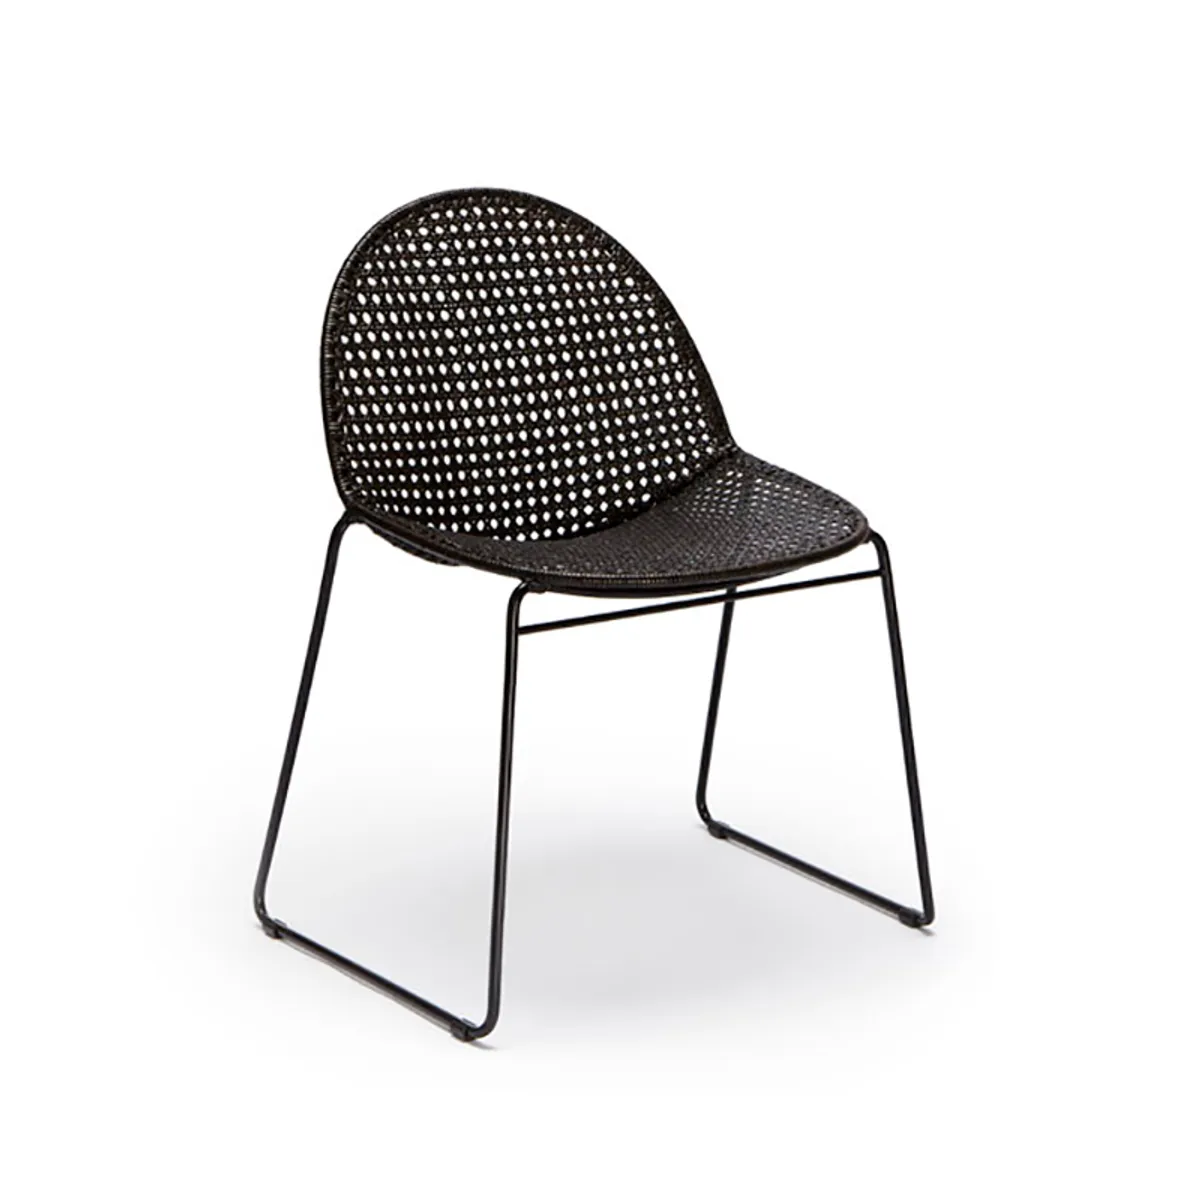 Percolator Side Chair Cane With Sled Legs For Cafes And Restaurants 984